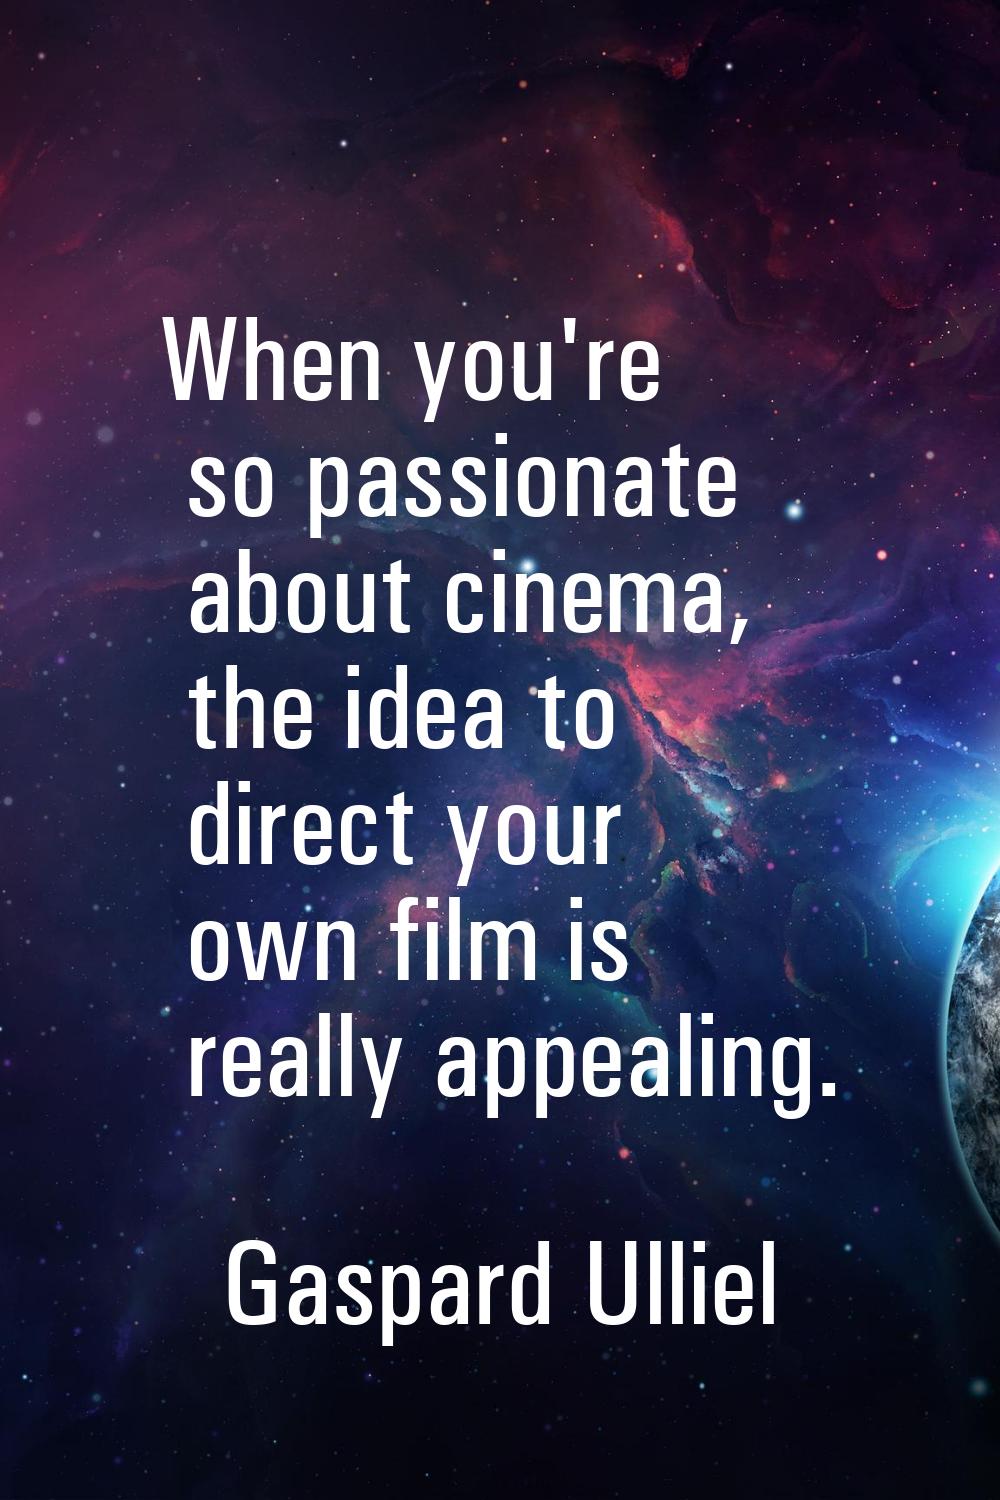 When you're so passionate about cinema, the idea to direct your own film is really appealing.